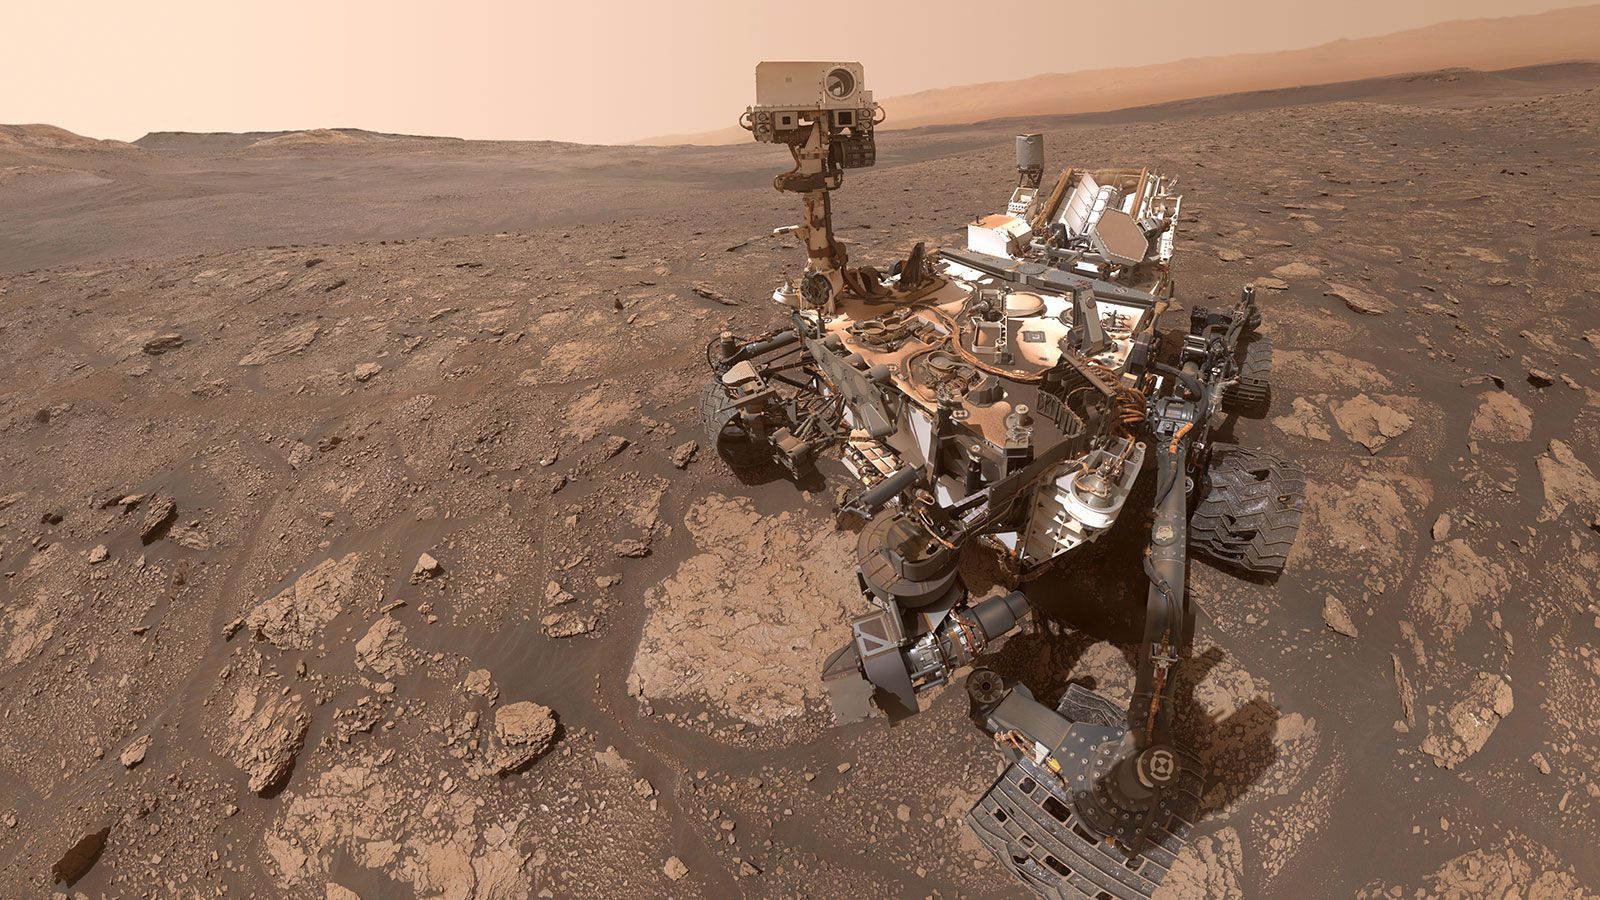 Nasas Curiosity Mars Rover Takes New Selfie At Mary Anning Site